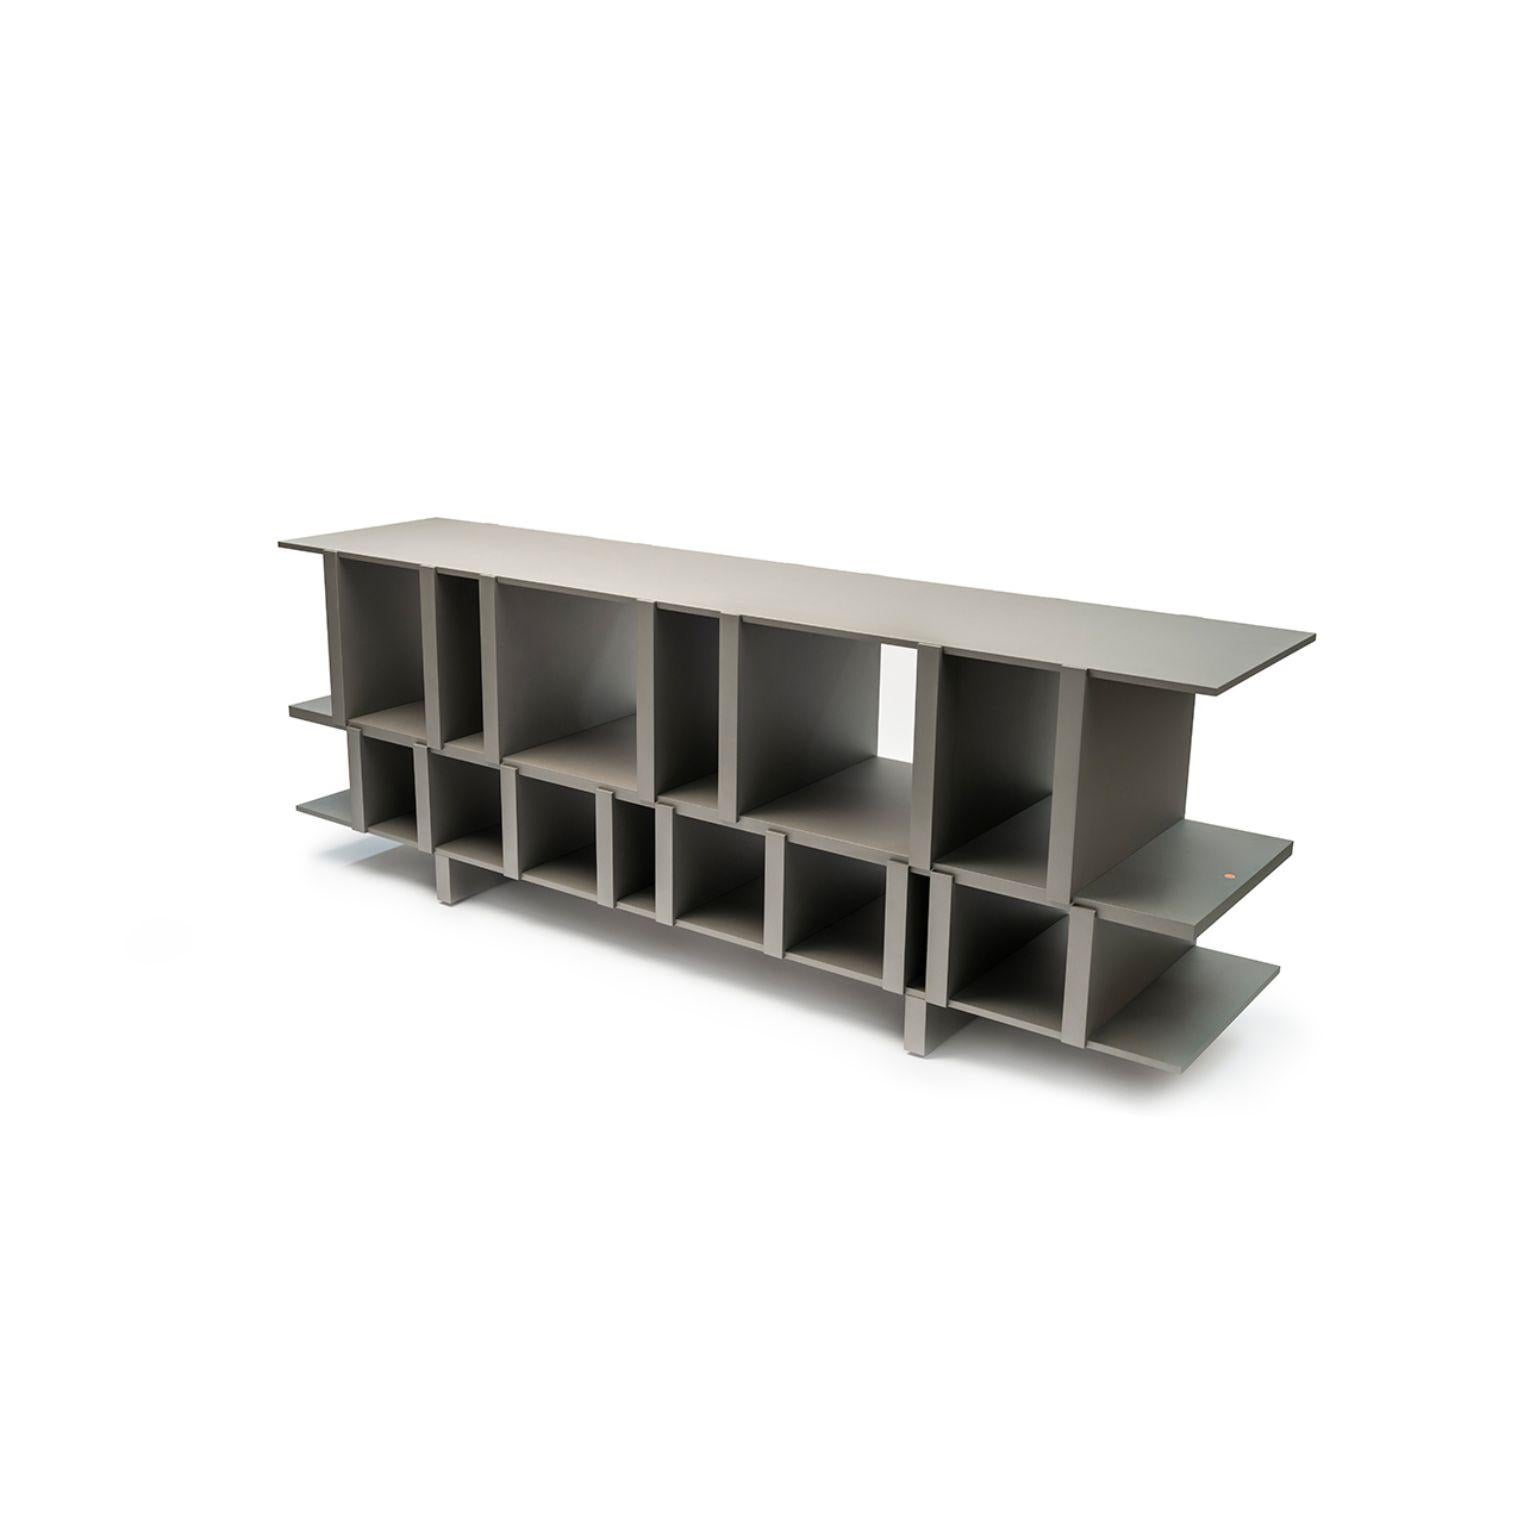 Pyrite bookshelf by Luca Nichetto
Materials:
Dimensions: W 200 x D 31.6 x H 69 cm

Inspired by optical illusion artworks, the design of Pyrite bookshelf amazes through an unexpected
distribution between empty and full spaces and a structure